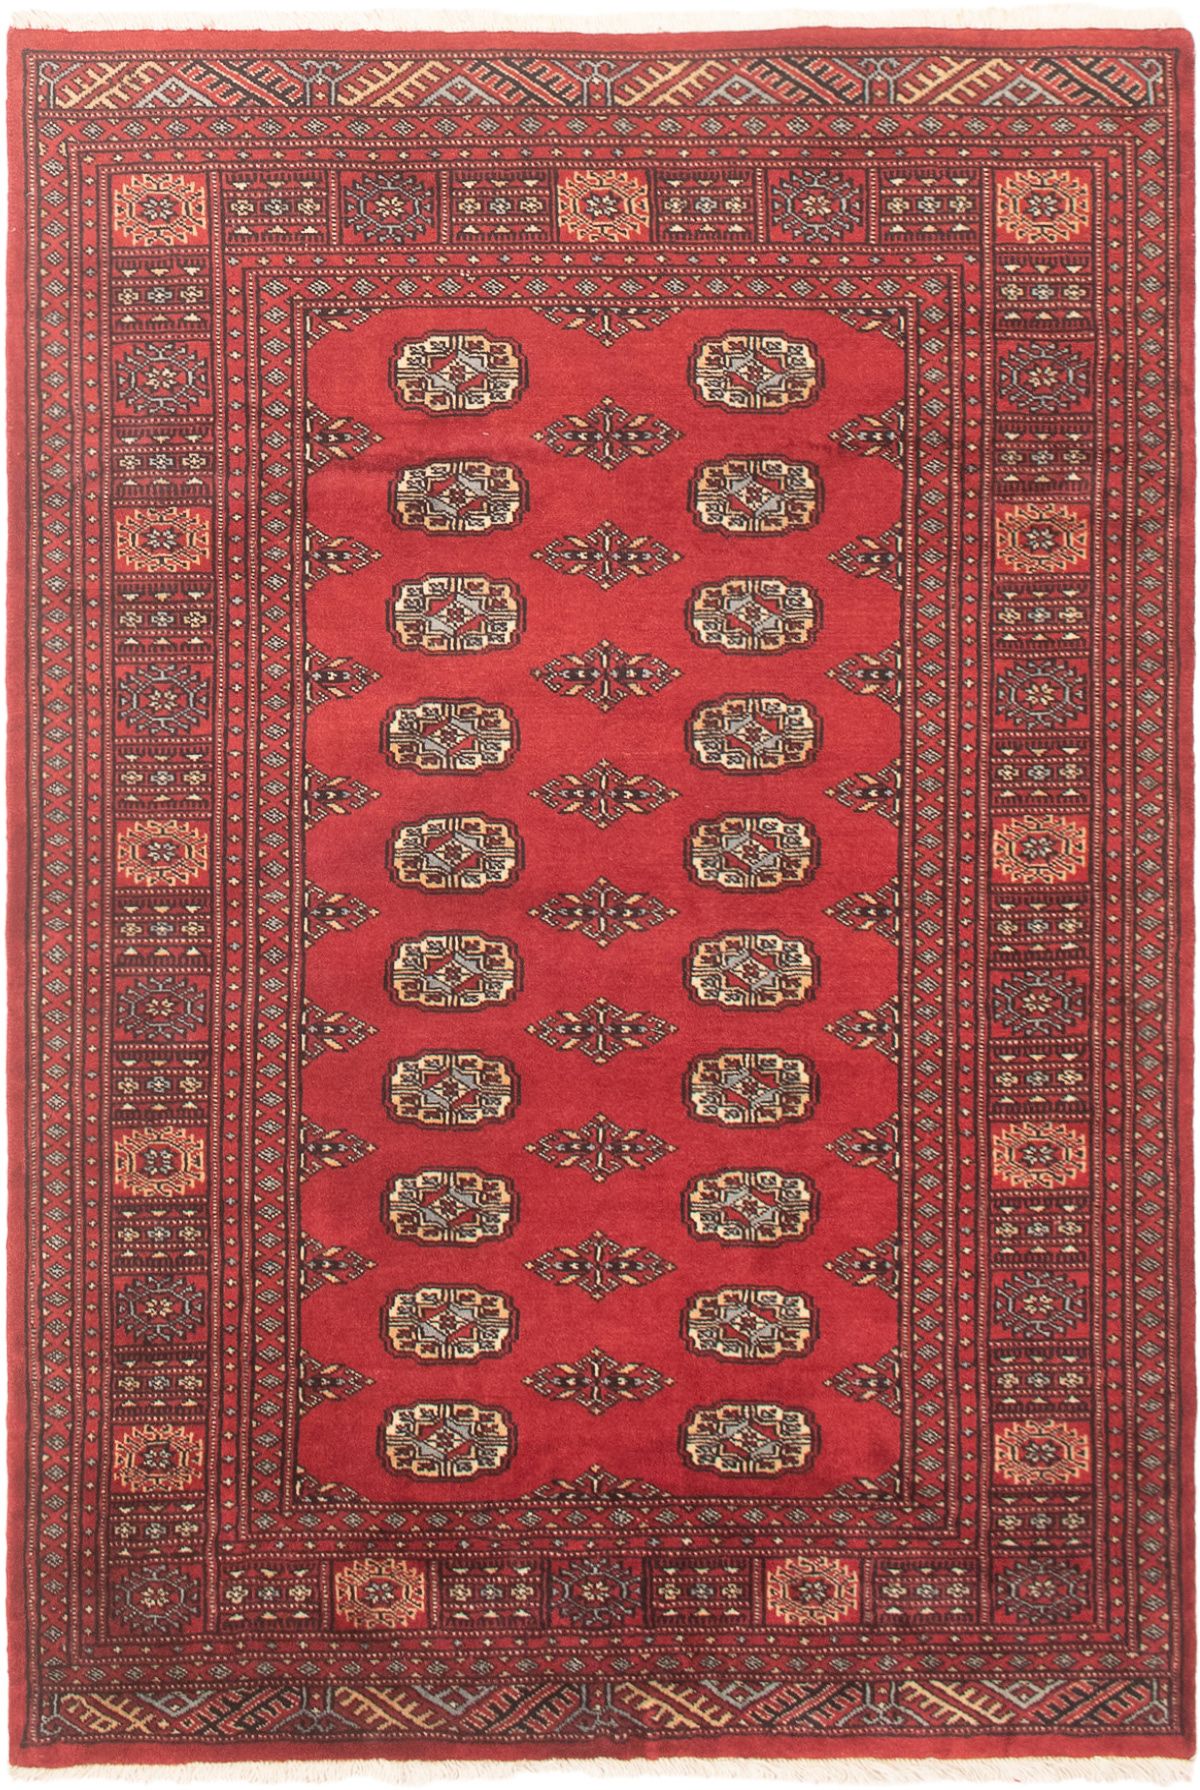 Hand-knotted Finest Peshawar Bokhara Red Wool Rug 4'0" x 6'0"  Size: 4'0" x 6'0"  